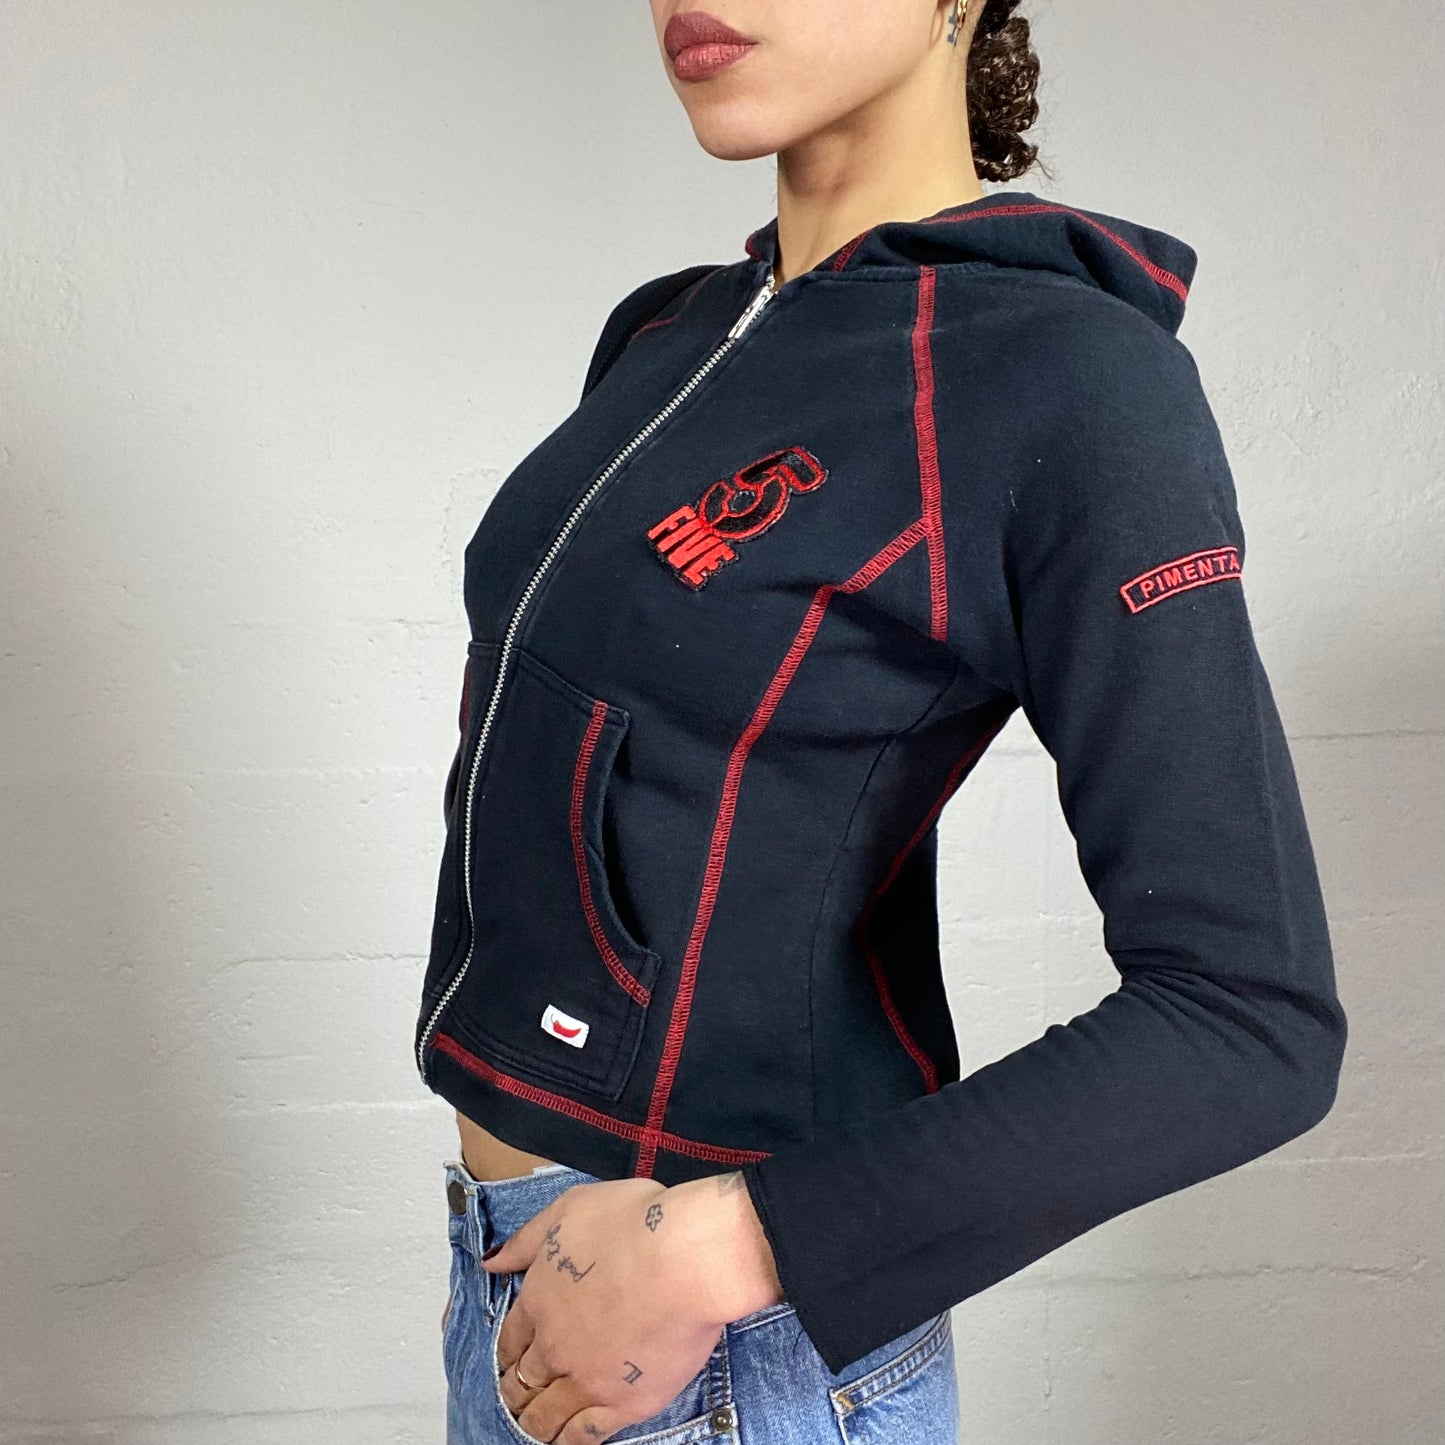 Vintage 2000's Downtown Girl Black Zip Up Jacket with Red Patches & Visible Seam Detail (S)